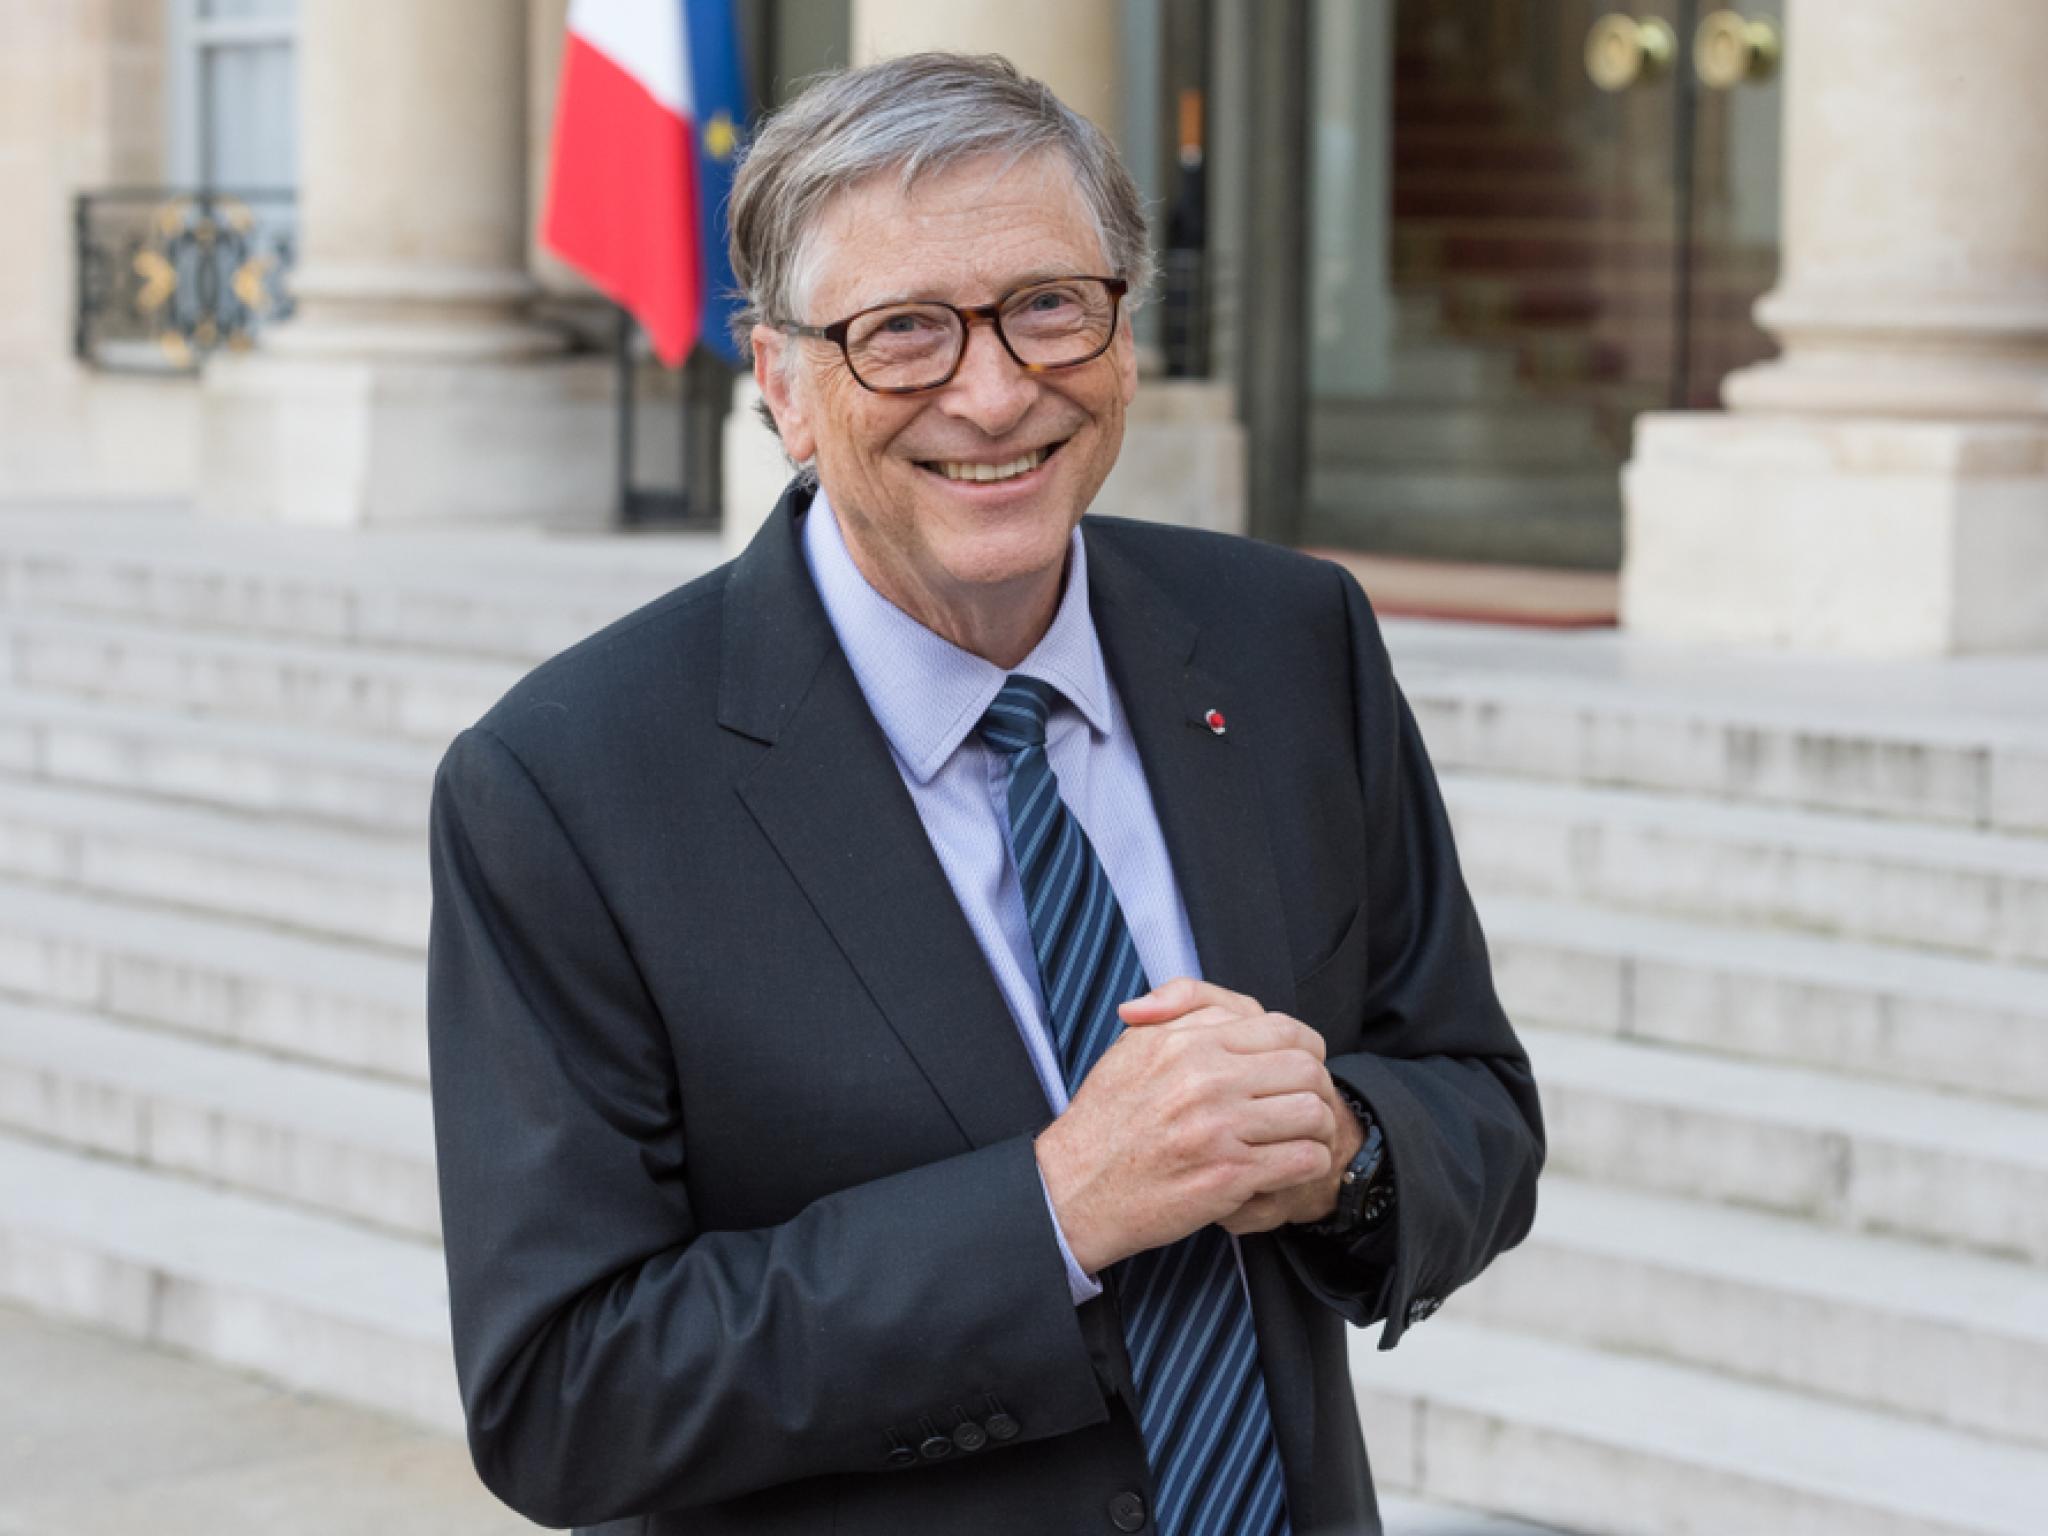  bill-gates-terrapower-ventures-into-advanced-nuclear-plant-construction-aiming-to-combat-climate-crisis-ive-been-waiting-for-this-day-for-nearly-20-years 